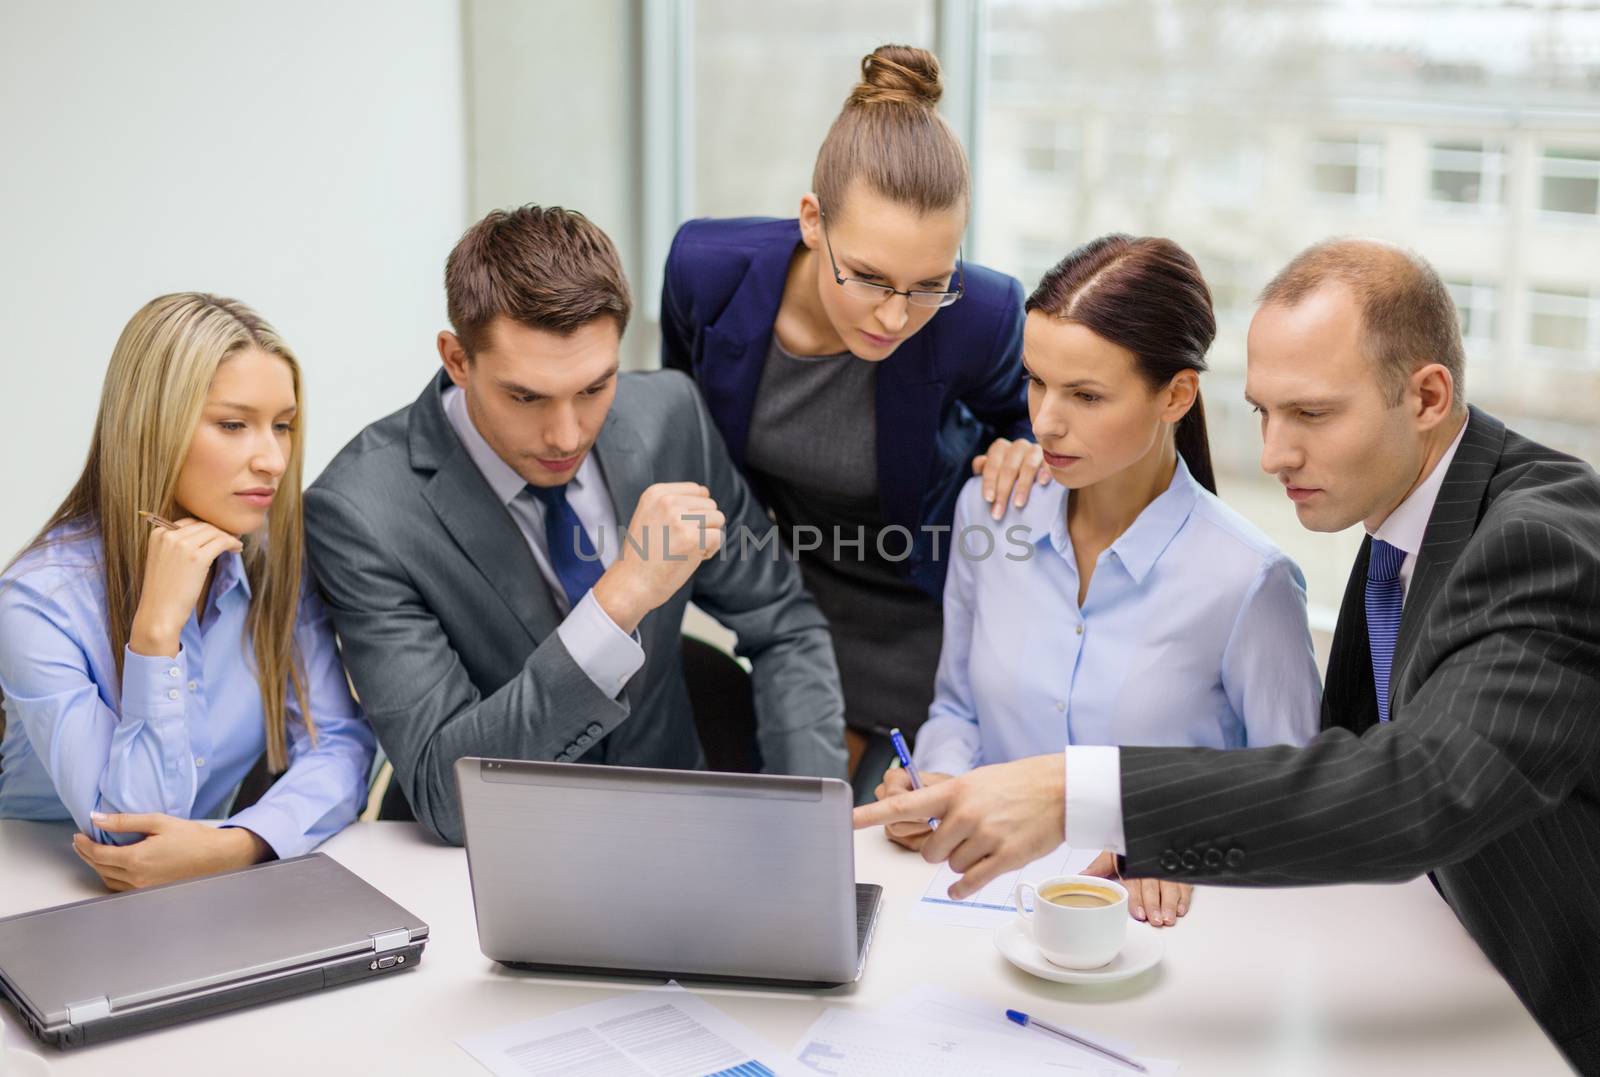 business team with laptop having discussion by dolgachov